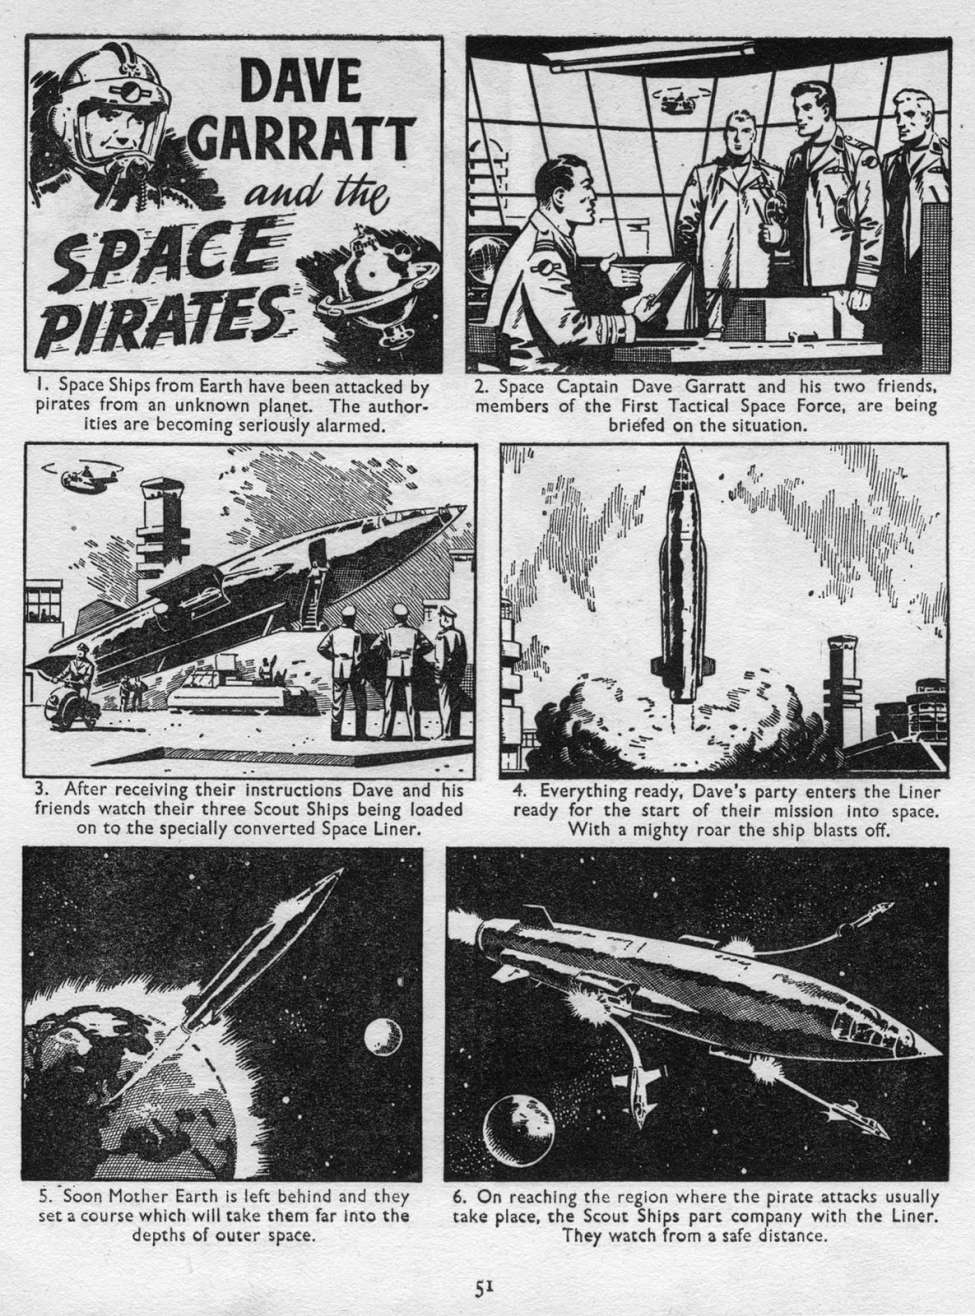 Comic Book Cover For Dave Garratt and The Space Pirates